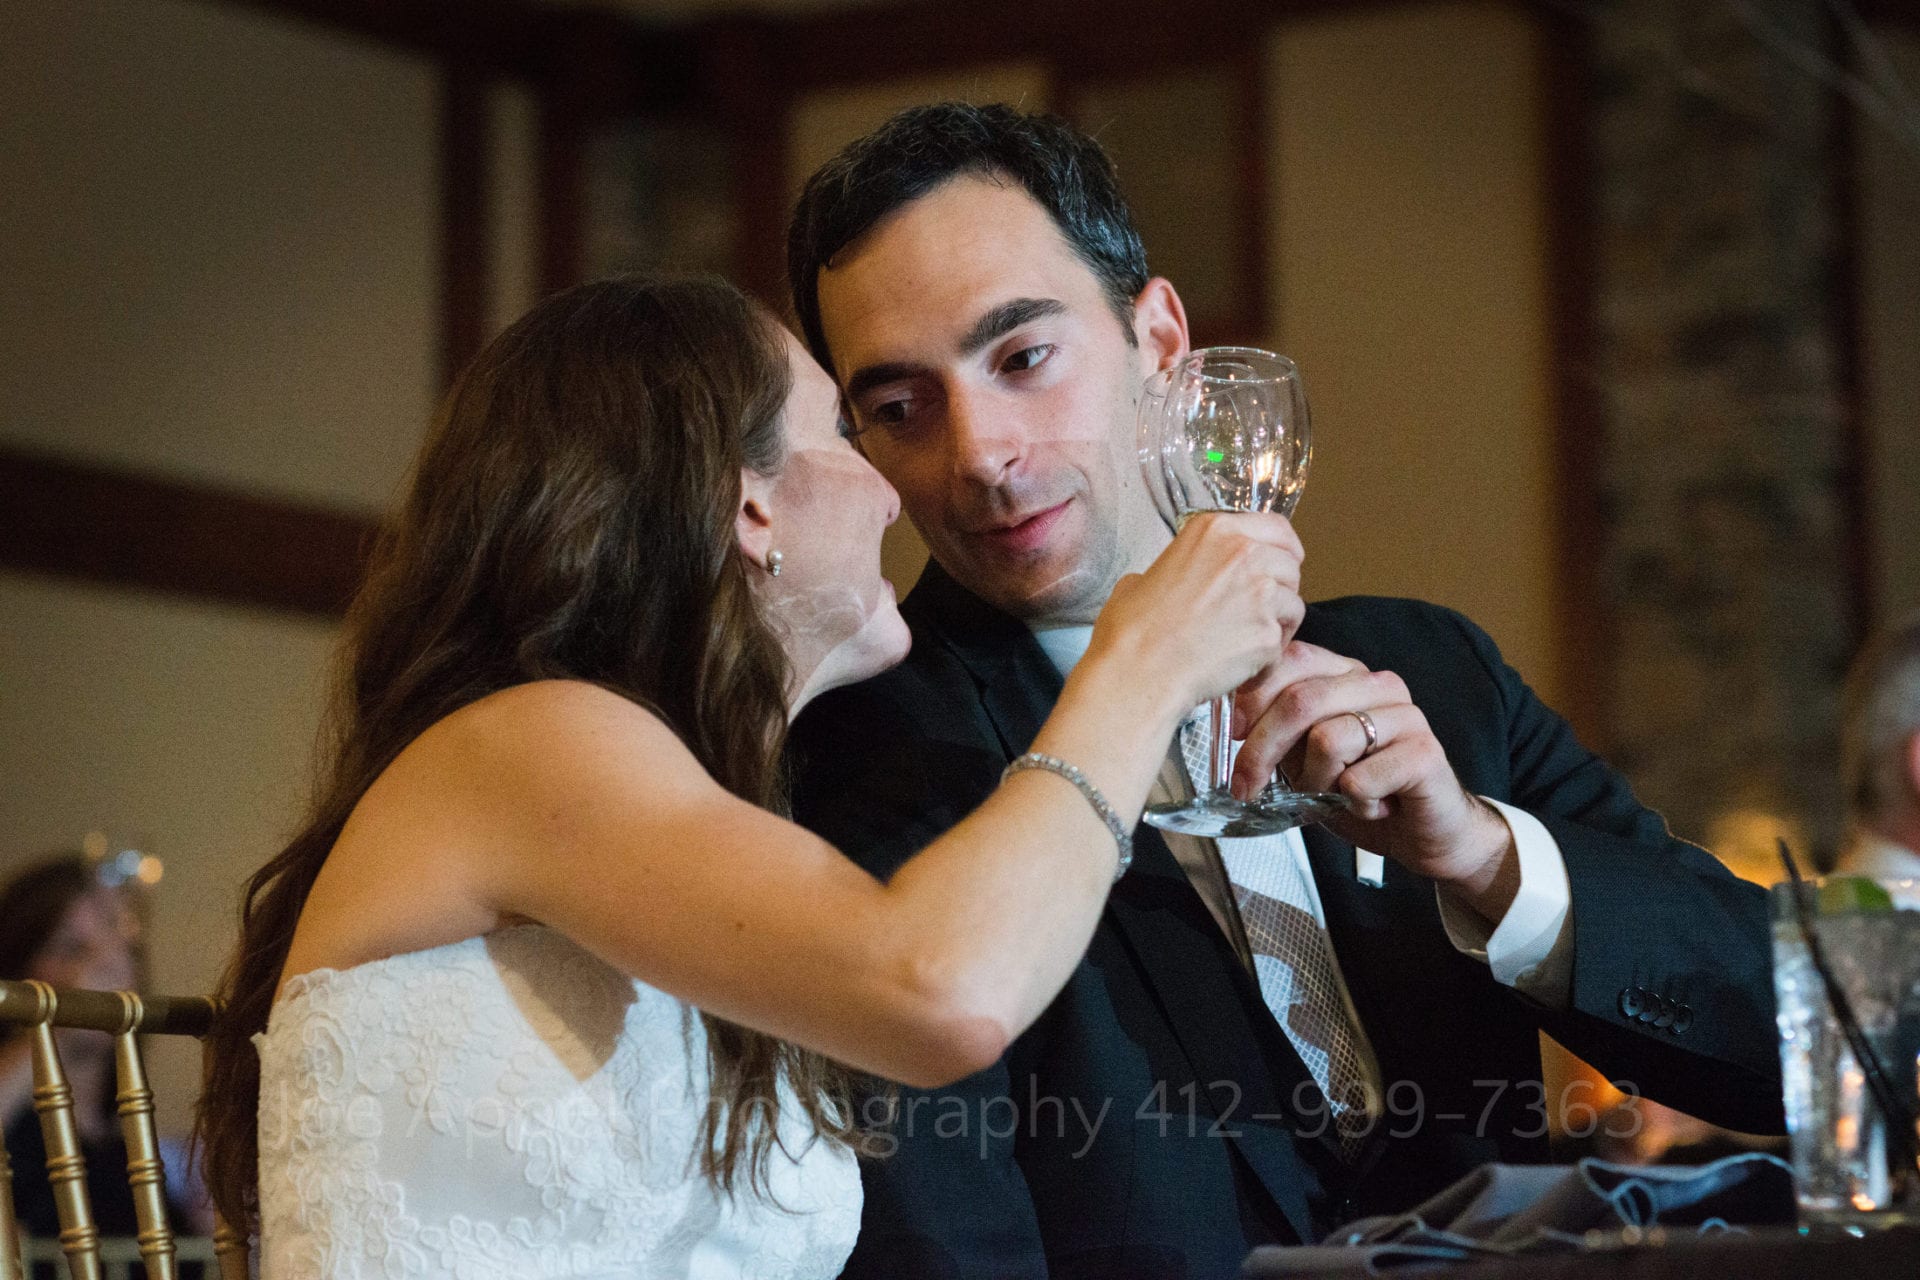 A groom looks at his bride as they sit together and touch glasses during a toast.